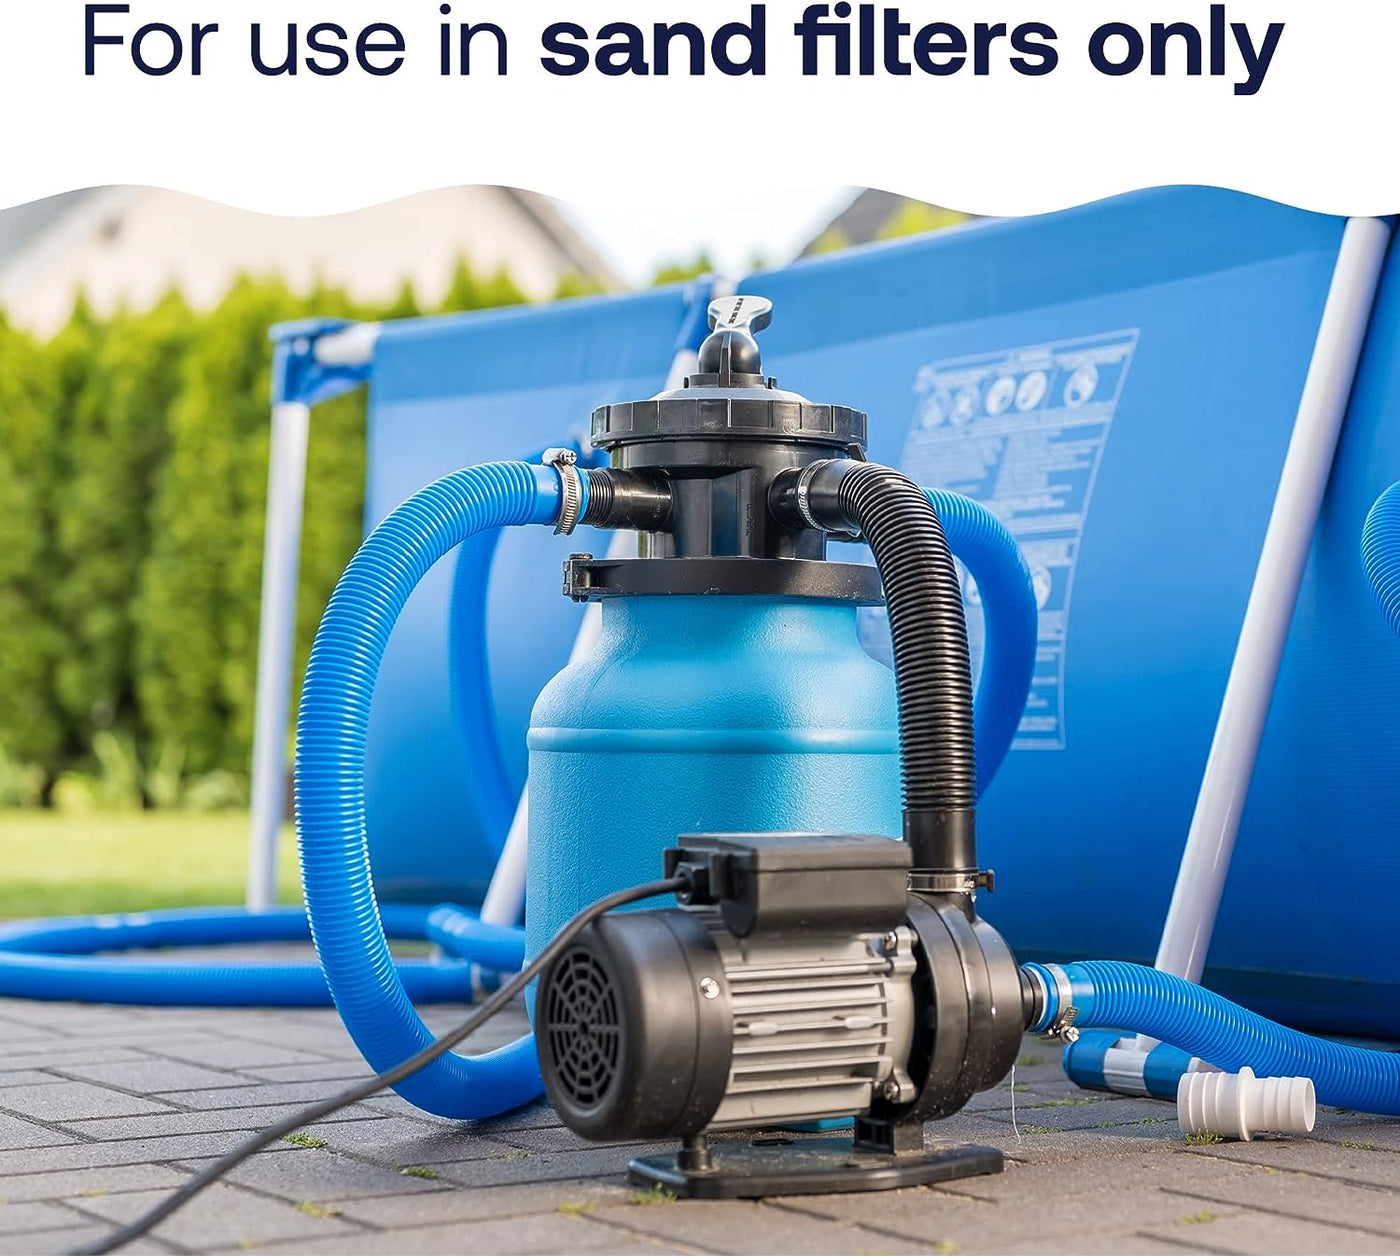 HTH 67120 Swimming Pool Care Pool Filter Sand, 50lb - $6